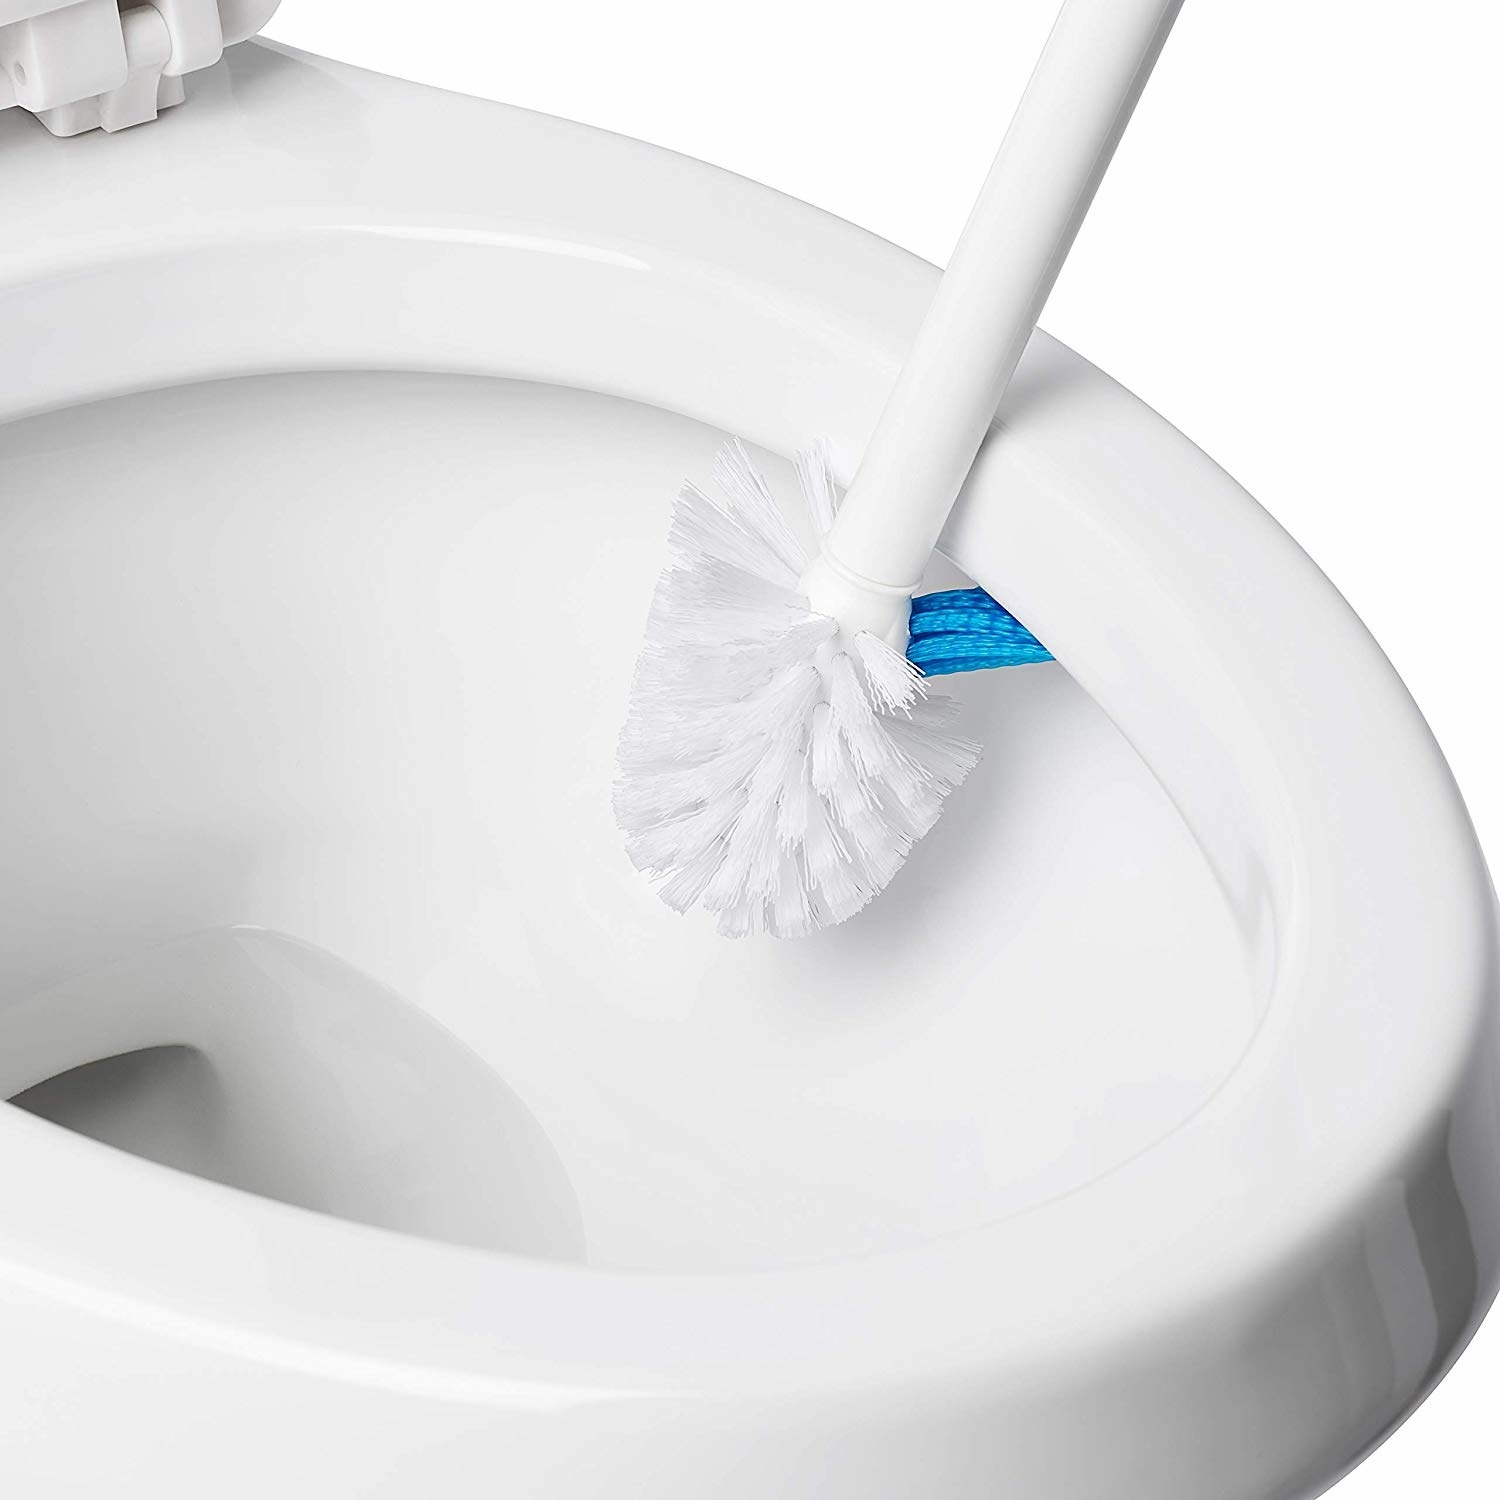 30 Things That Actually Make Cleaning Toilets Incredibly Easy